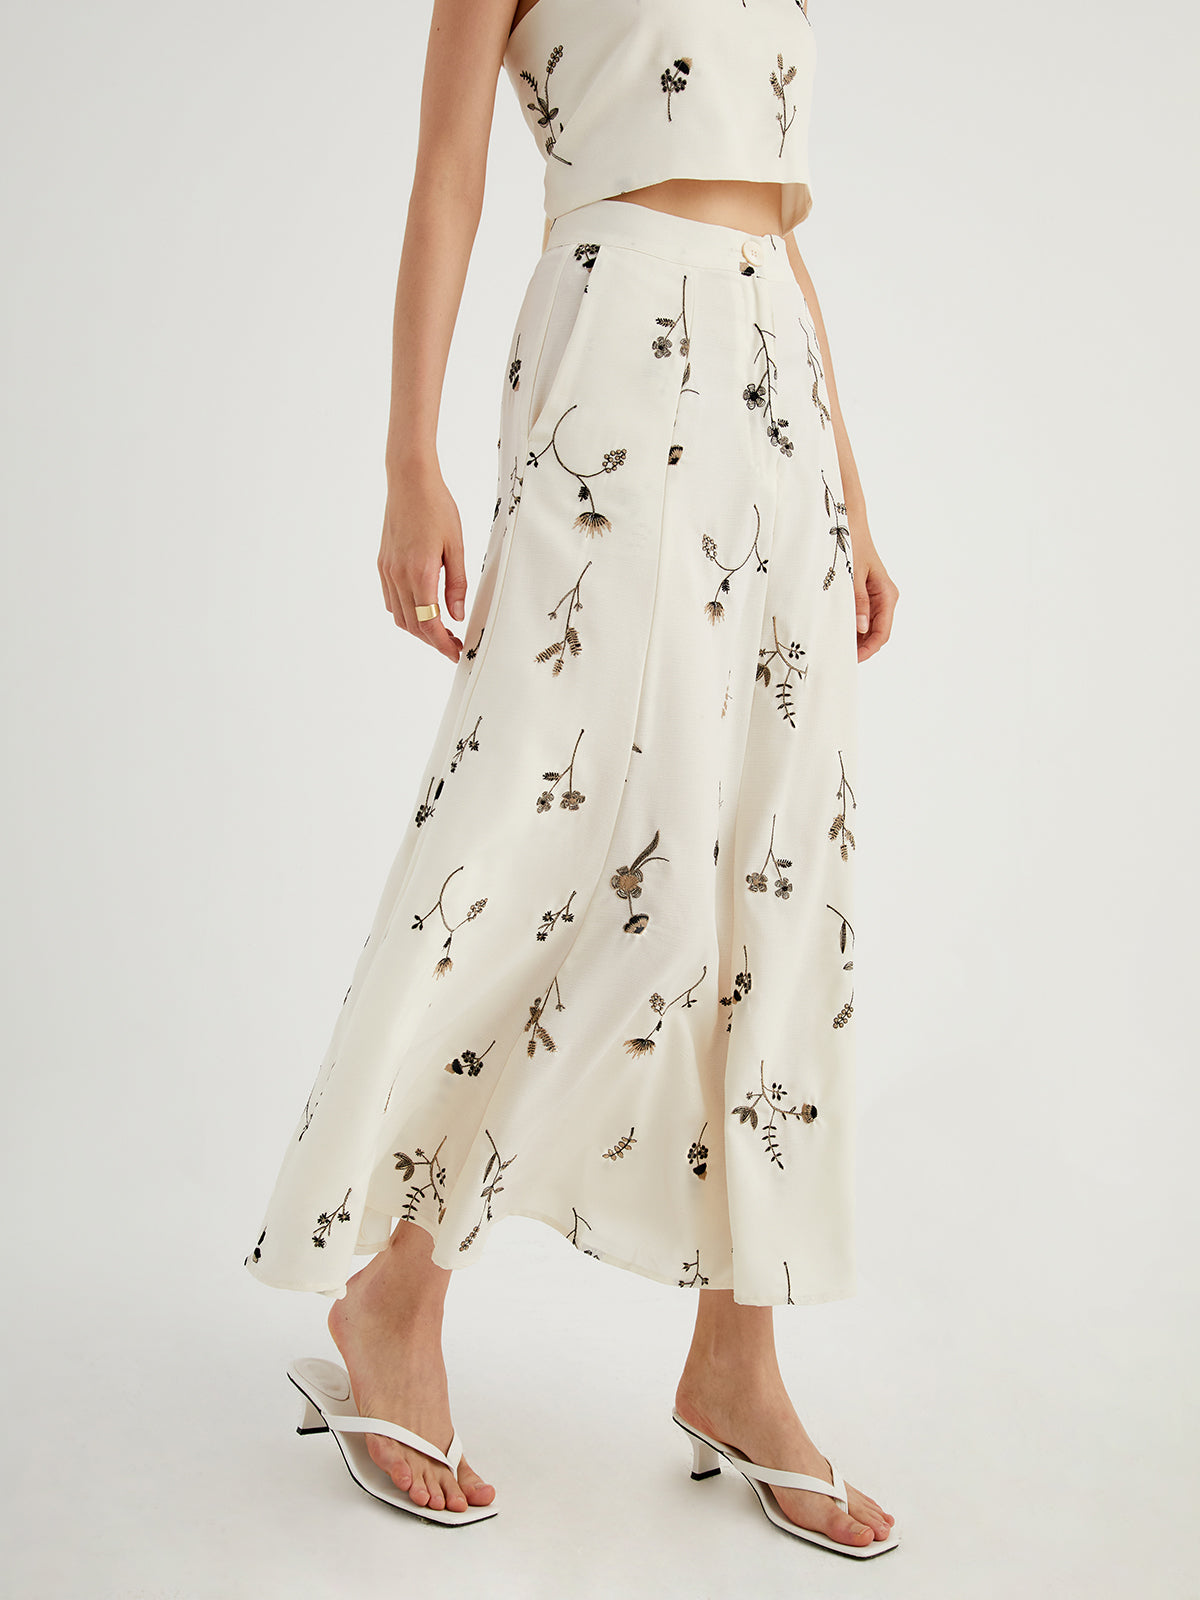 Embroidered Floral Long Skirt